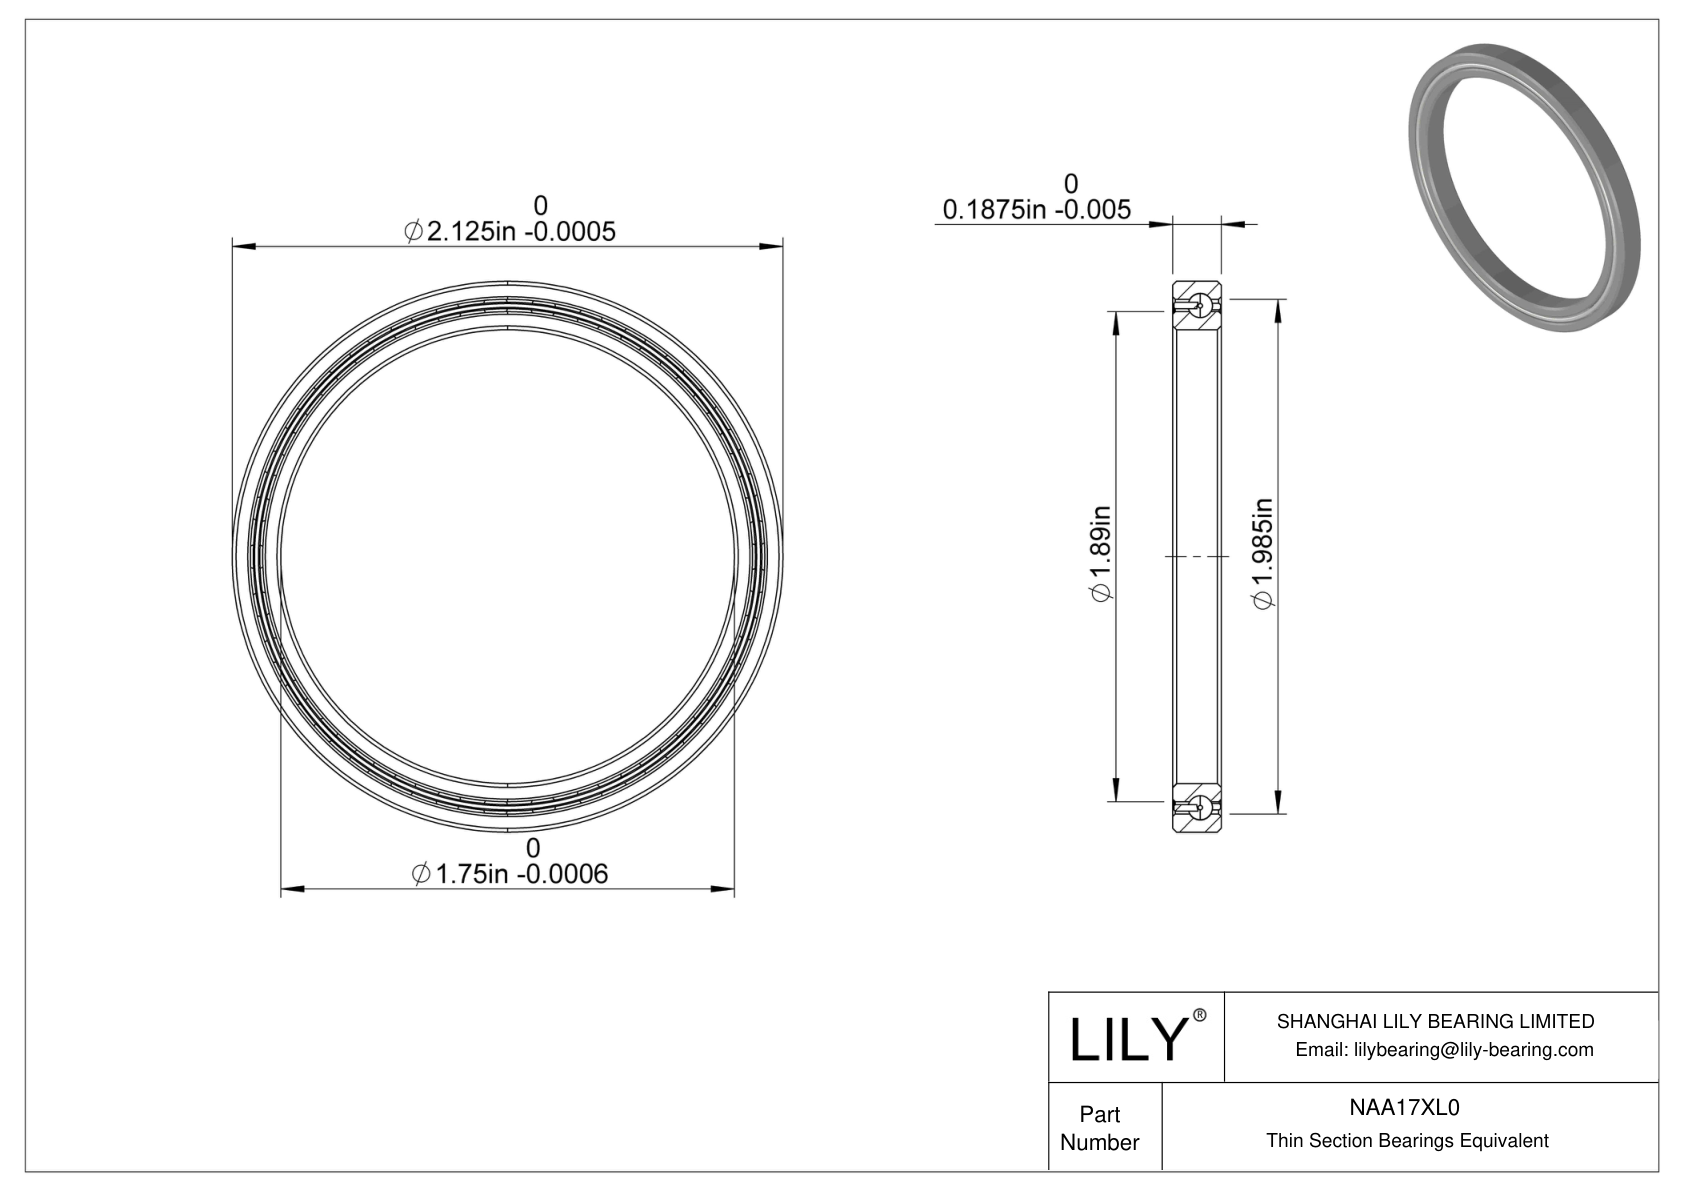 NAA17XL0 Constant Section (CS) Bearings cad drawing